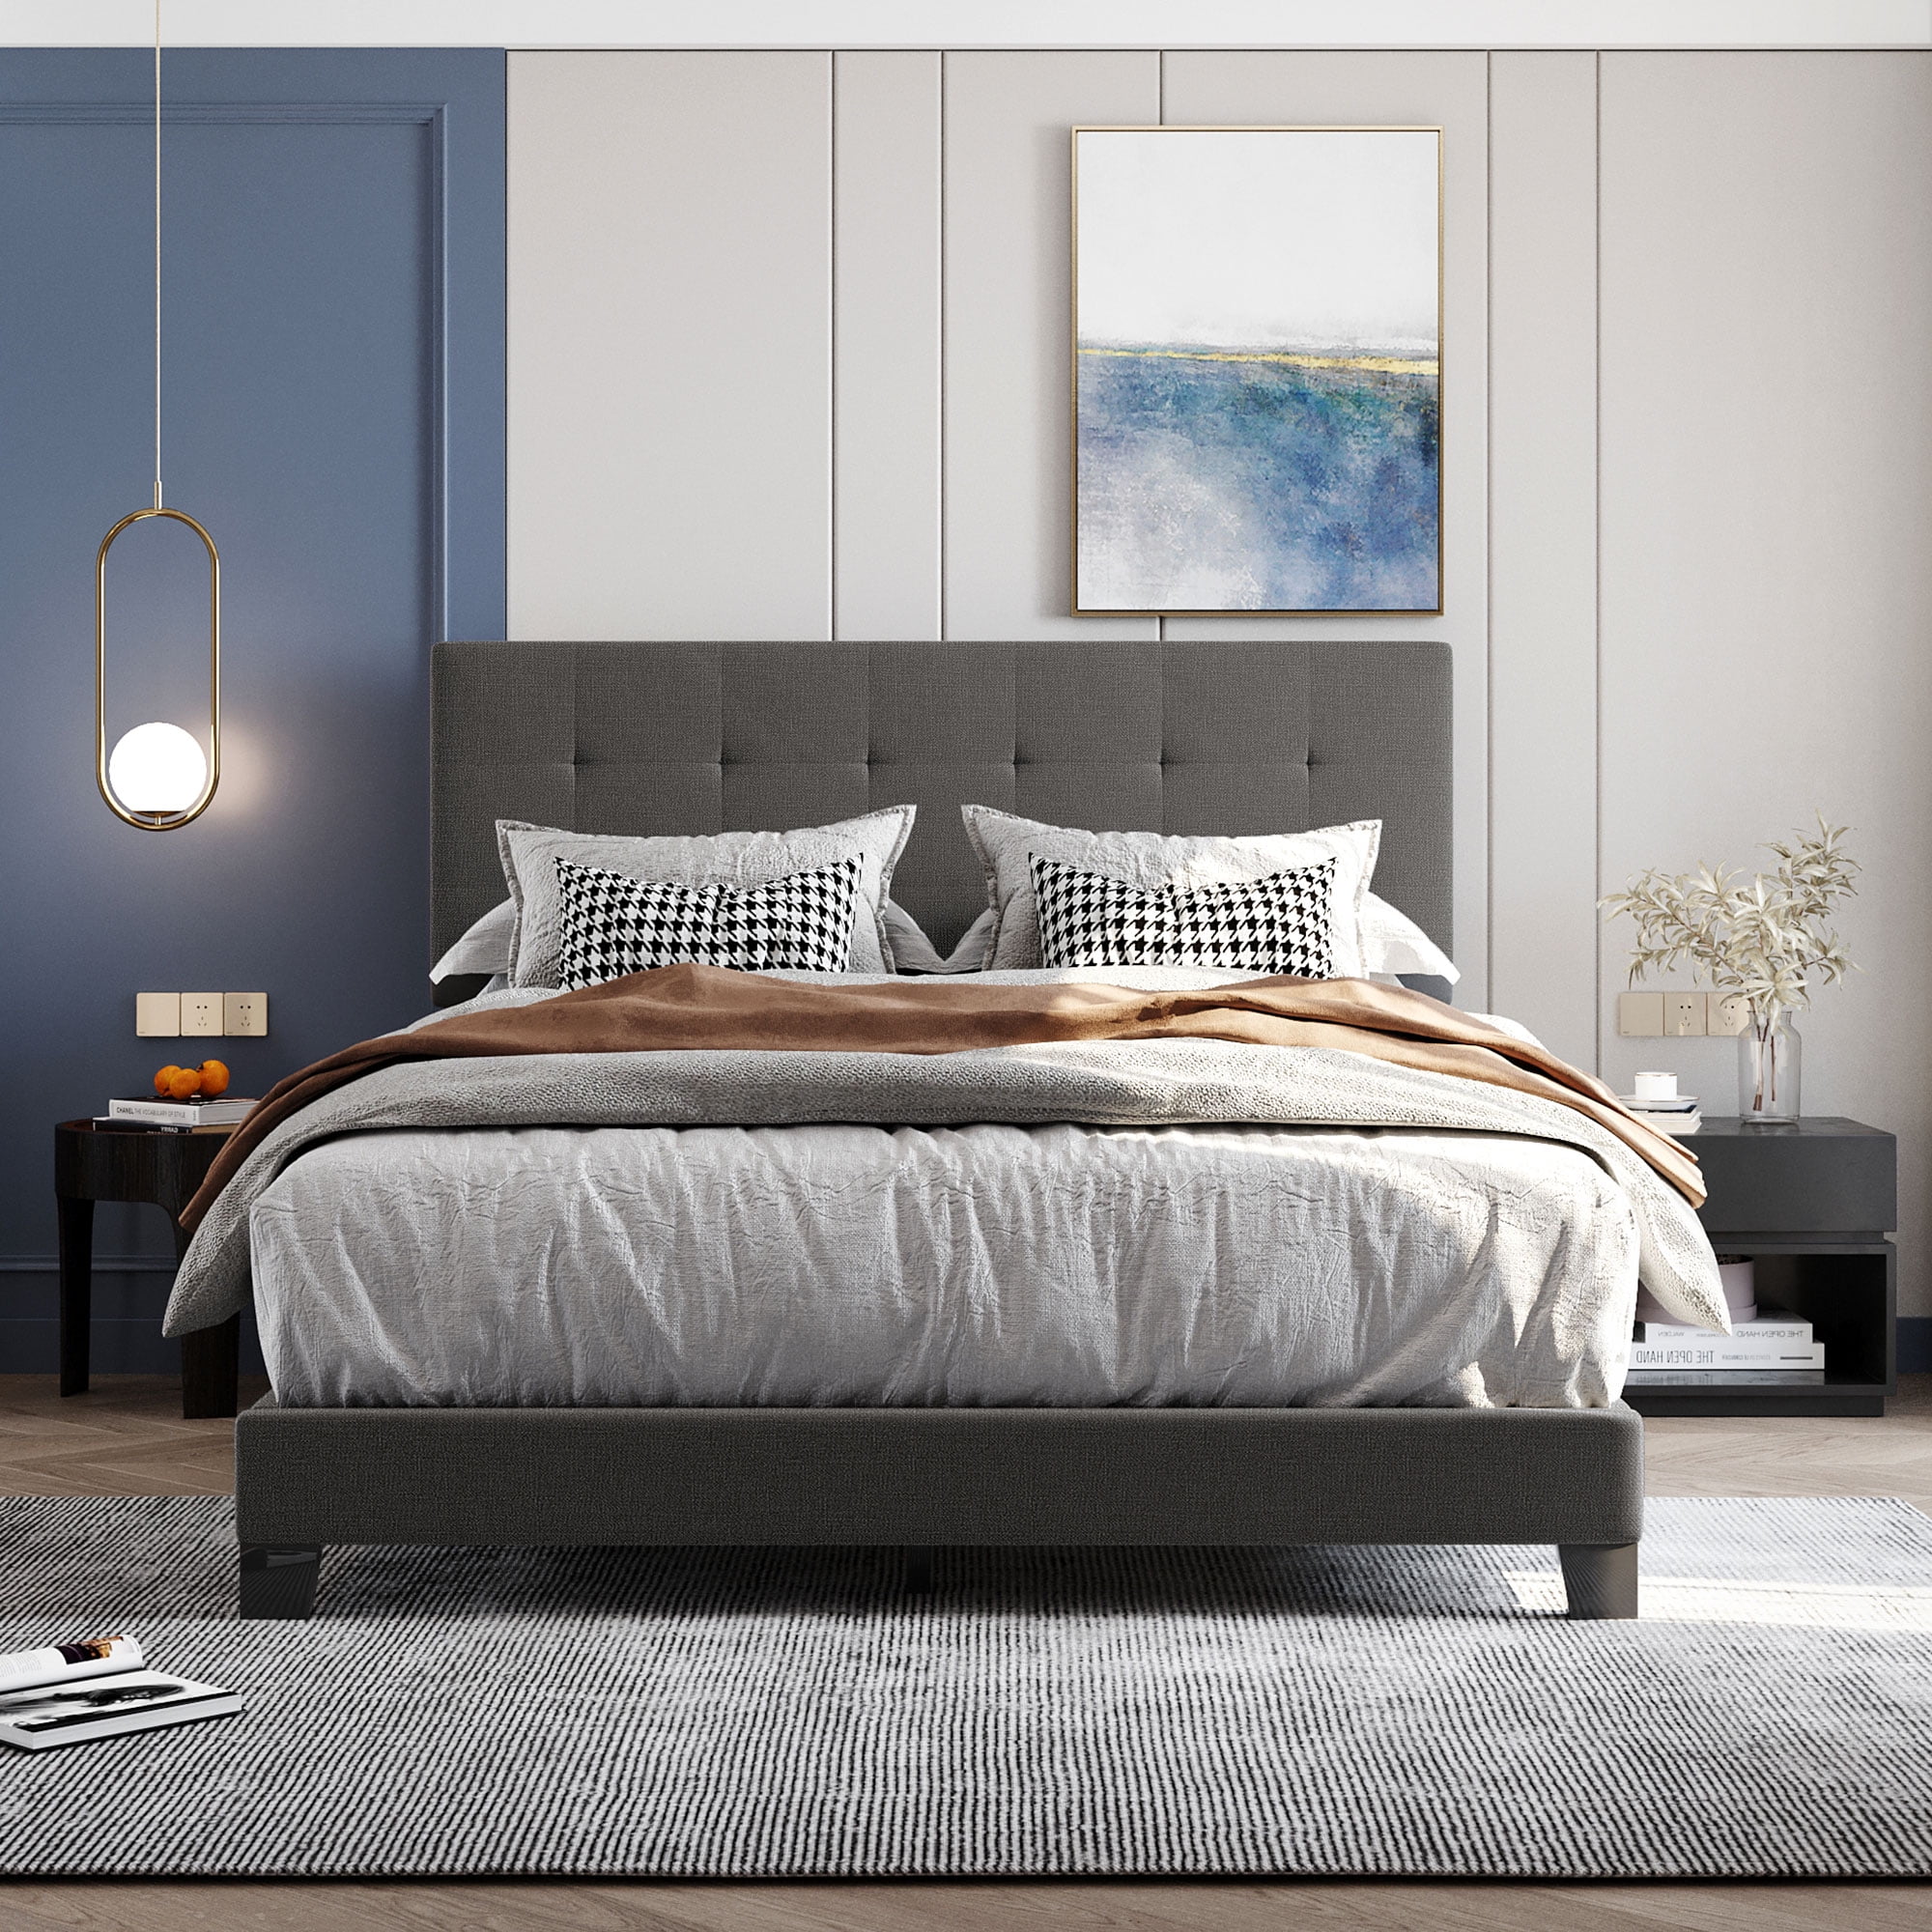 Queen Size Bed Frame Platform Bedroom Charcoal Gray Upholstered Stable Headboard 